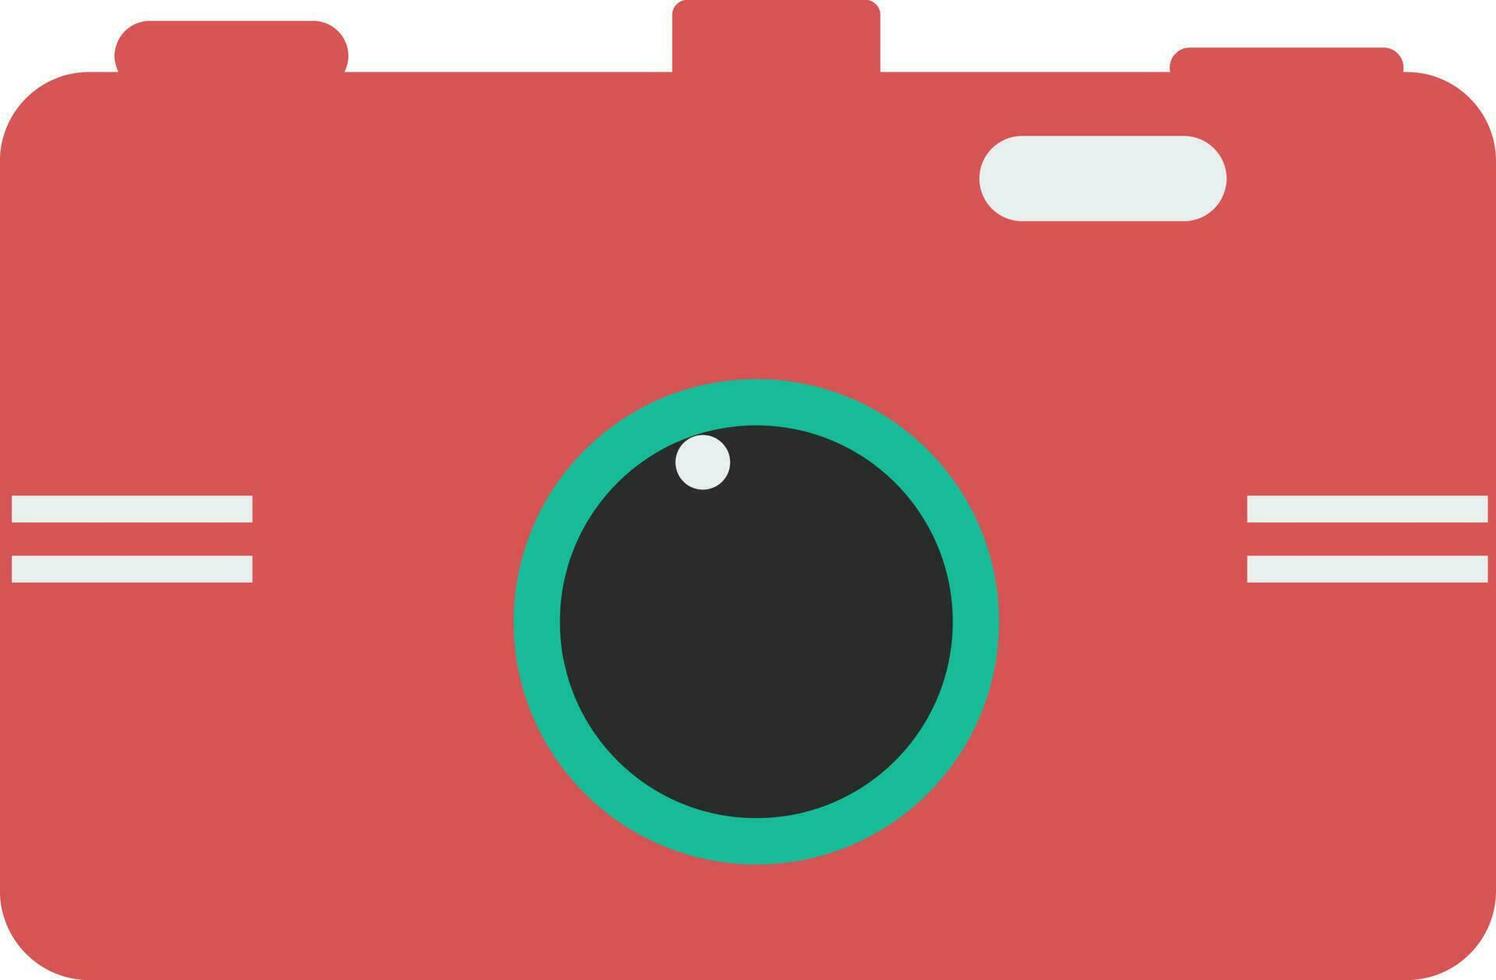 Isolated camera in pink color. vector